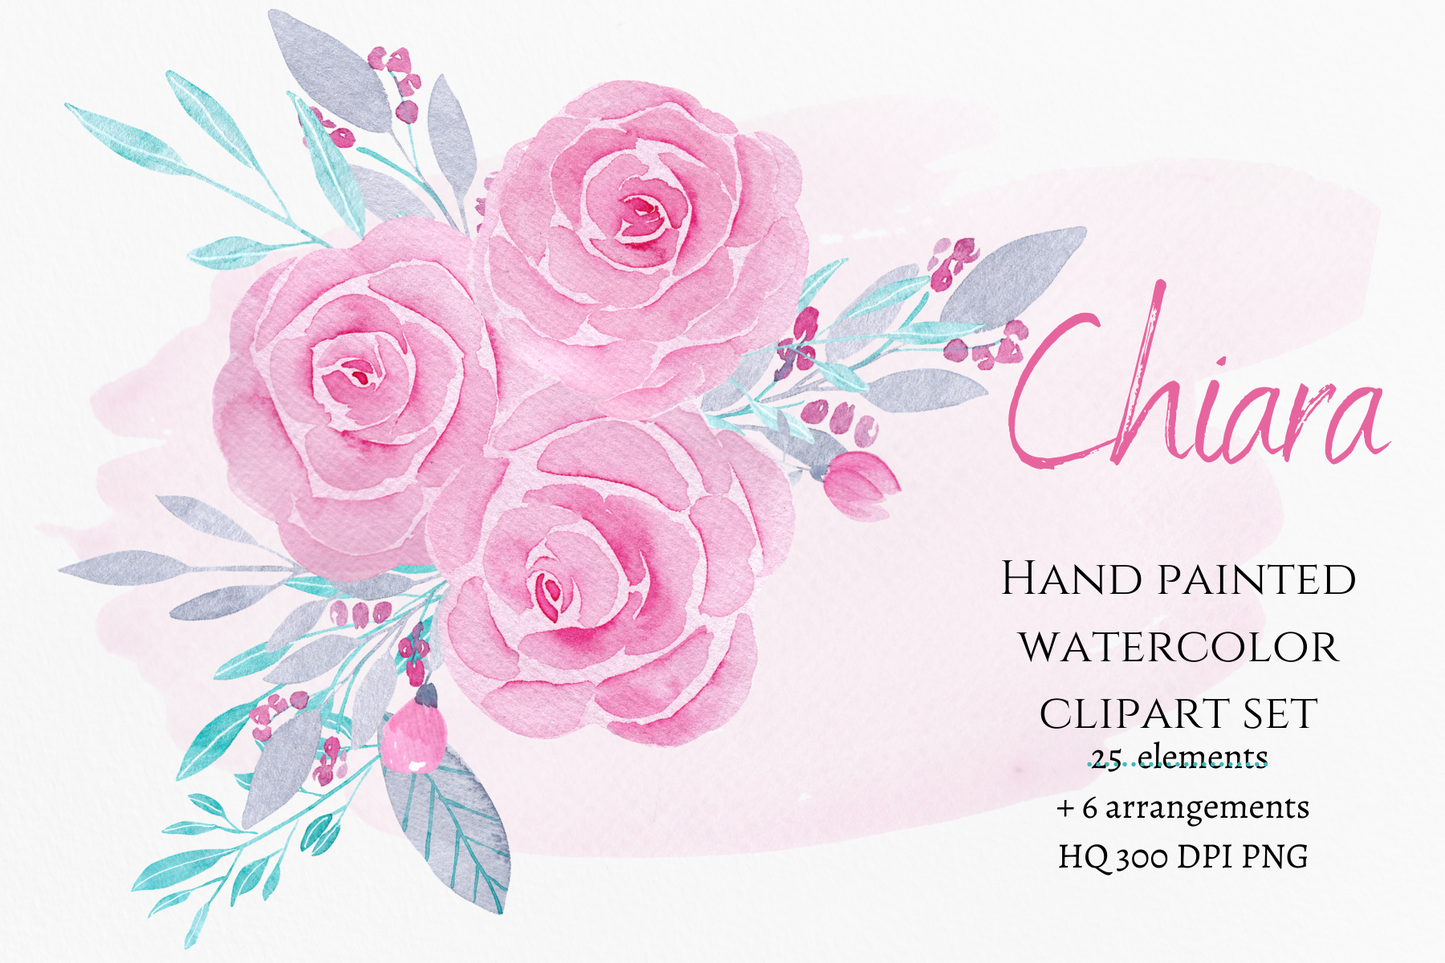 Hand painted floral graphics for invitations